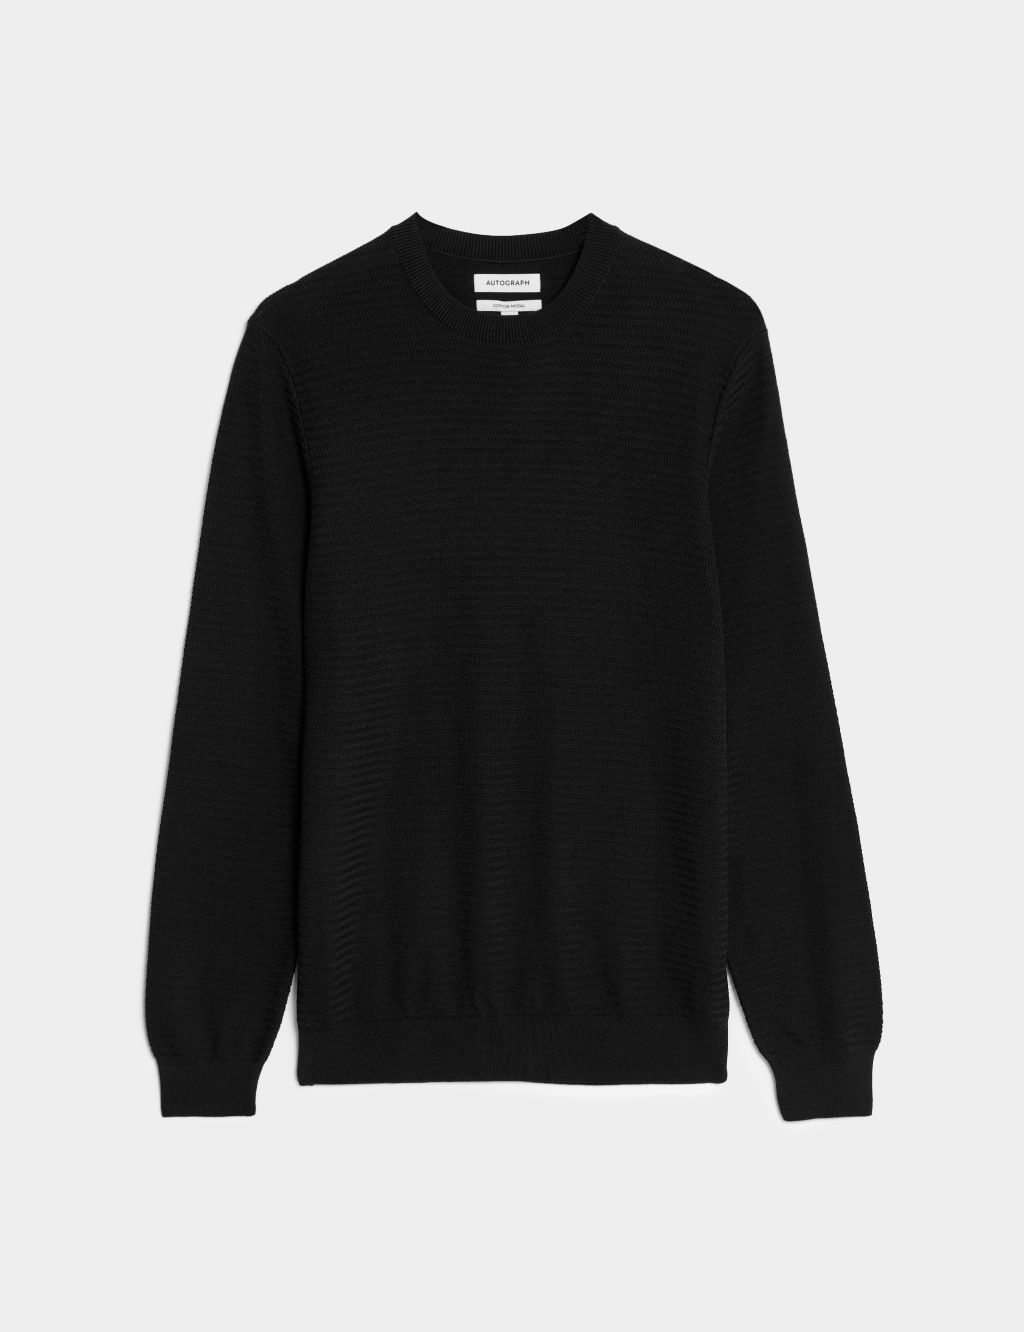 Cotton and Modal Blend Textured Crew Neck Jumper image 2